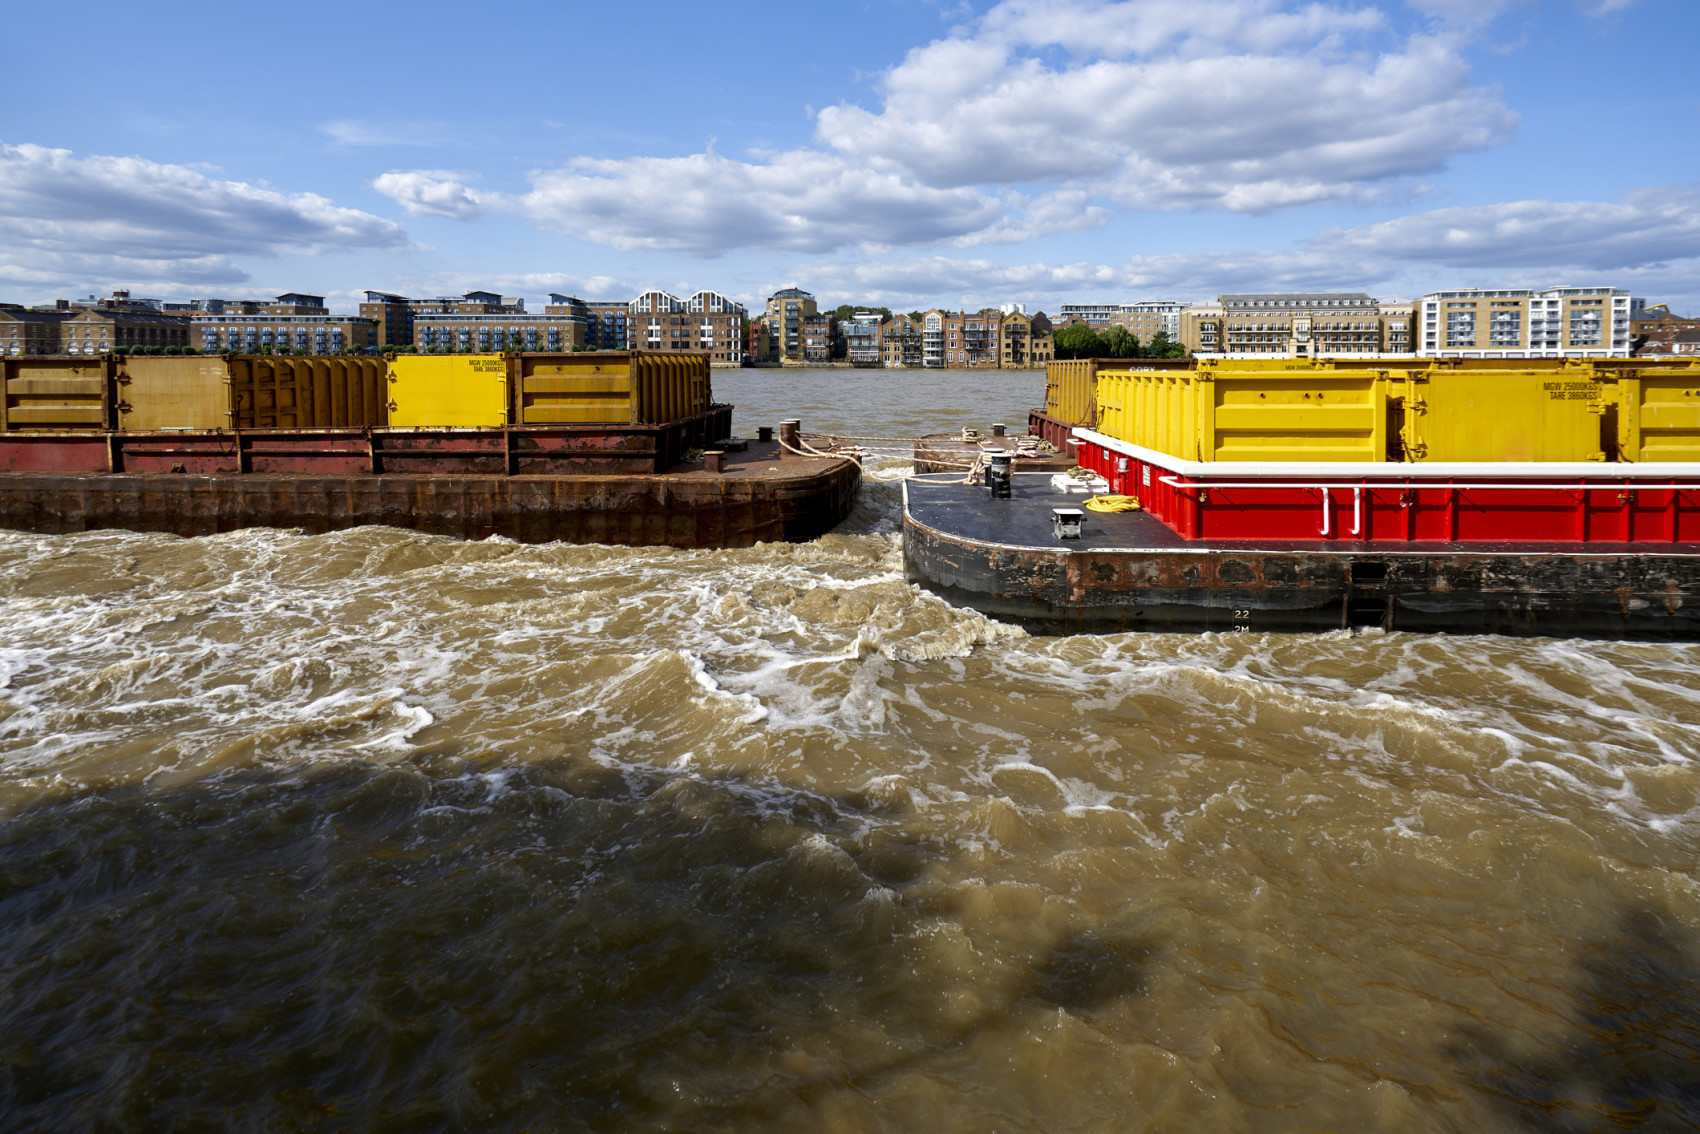 vessels carrying garbage in london UK (Matt Mawson/ Moment/ Getty Images)